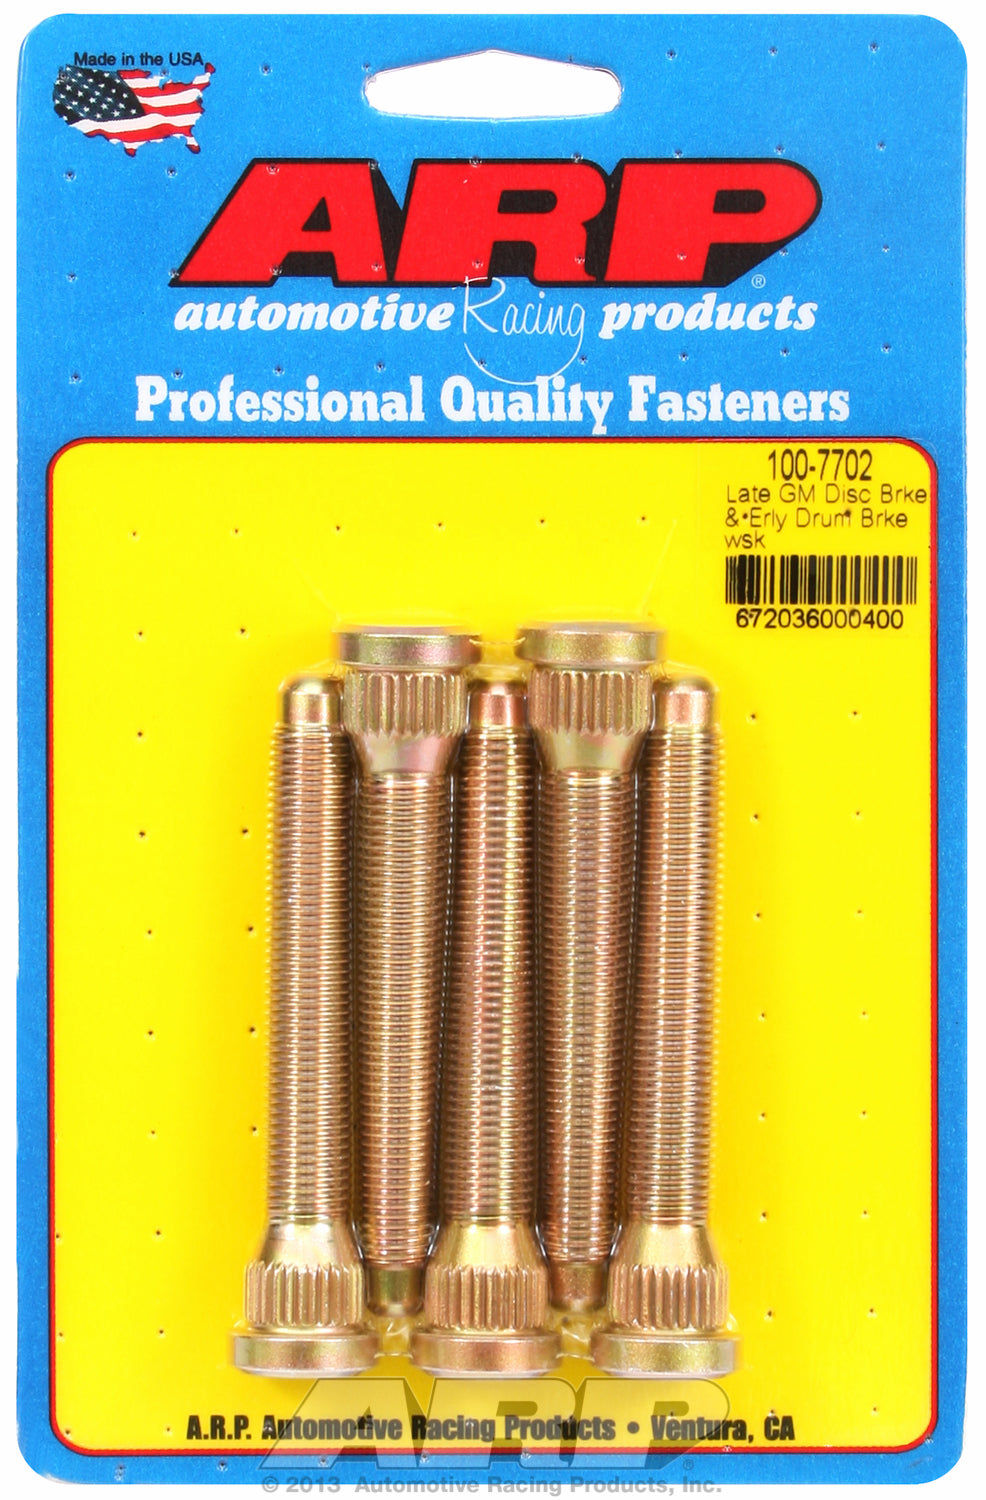 Wheel Stud Kit for Late GM Disk Brakes and Early Drum Brake